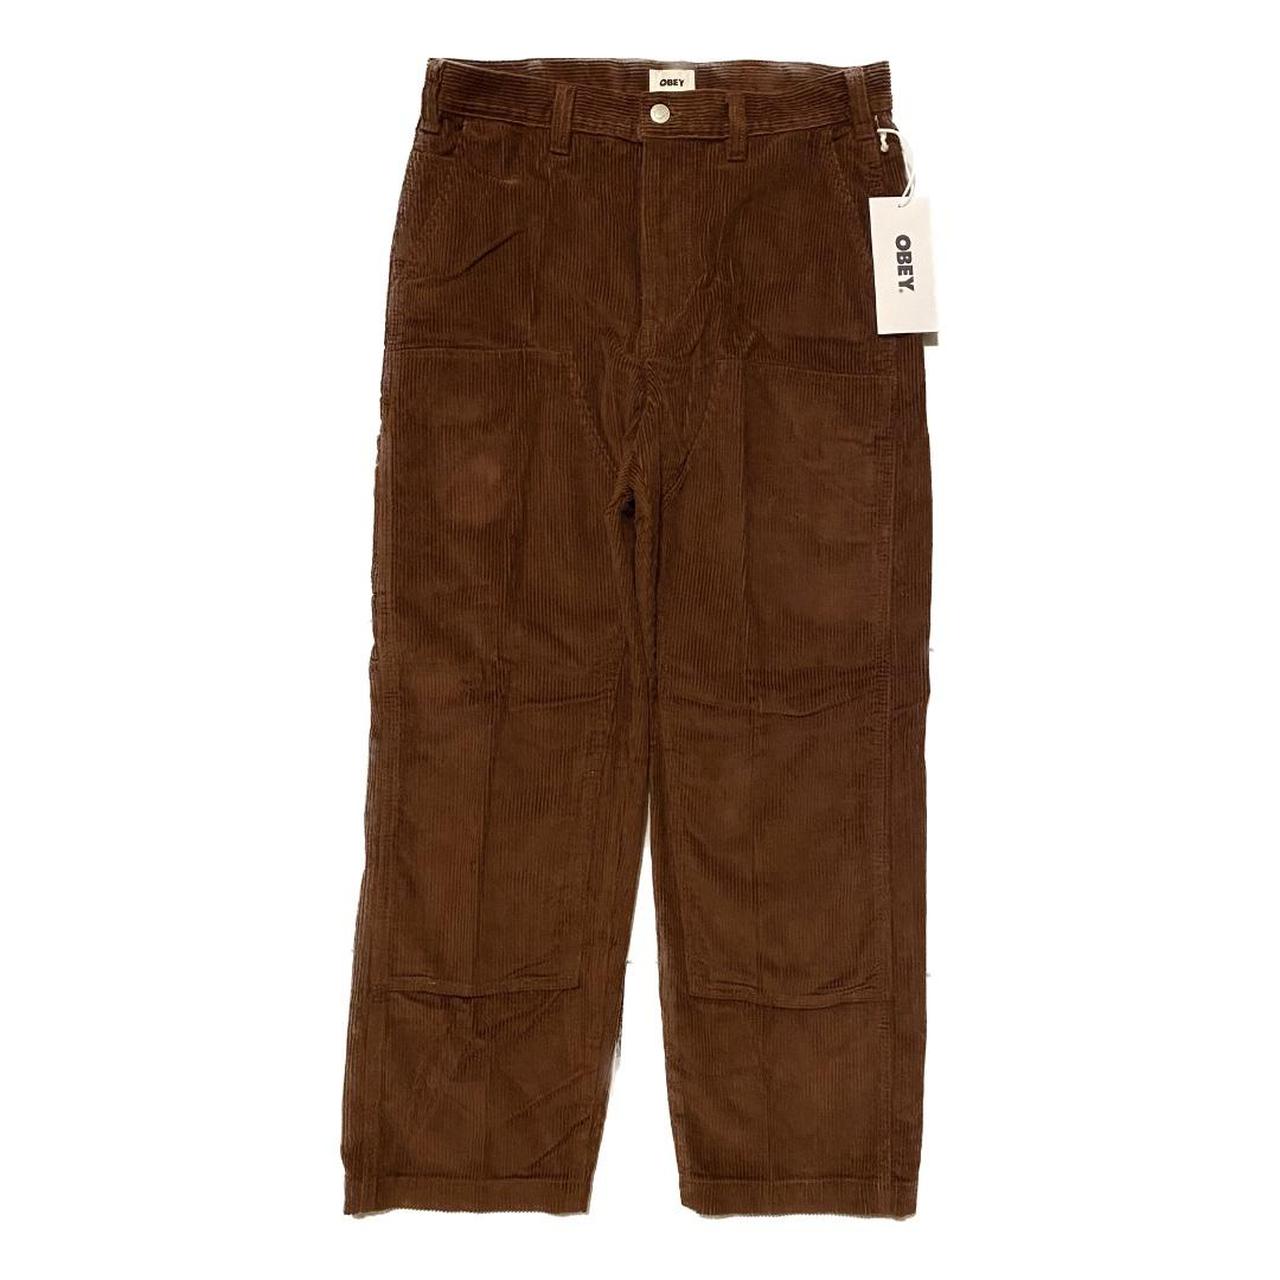 Obey Big Timer Cord Pants Sepia brown color These... - Depop